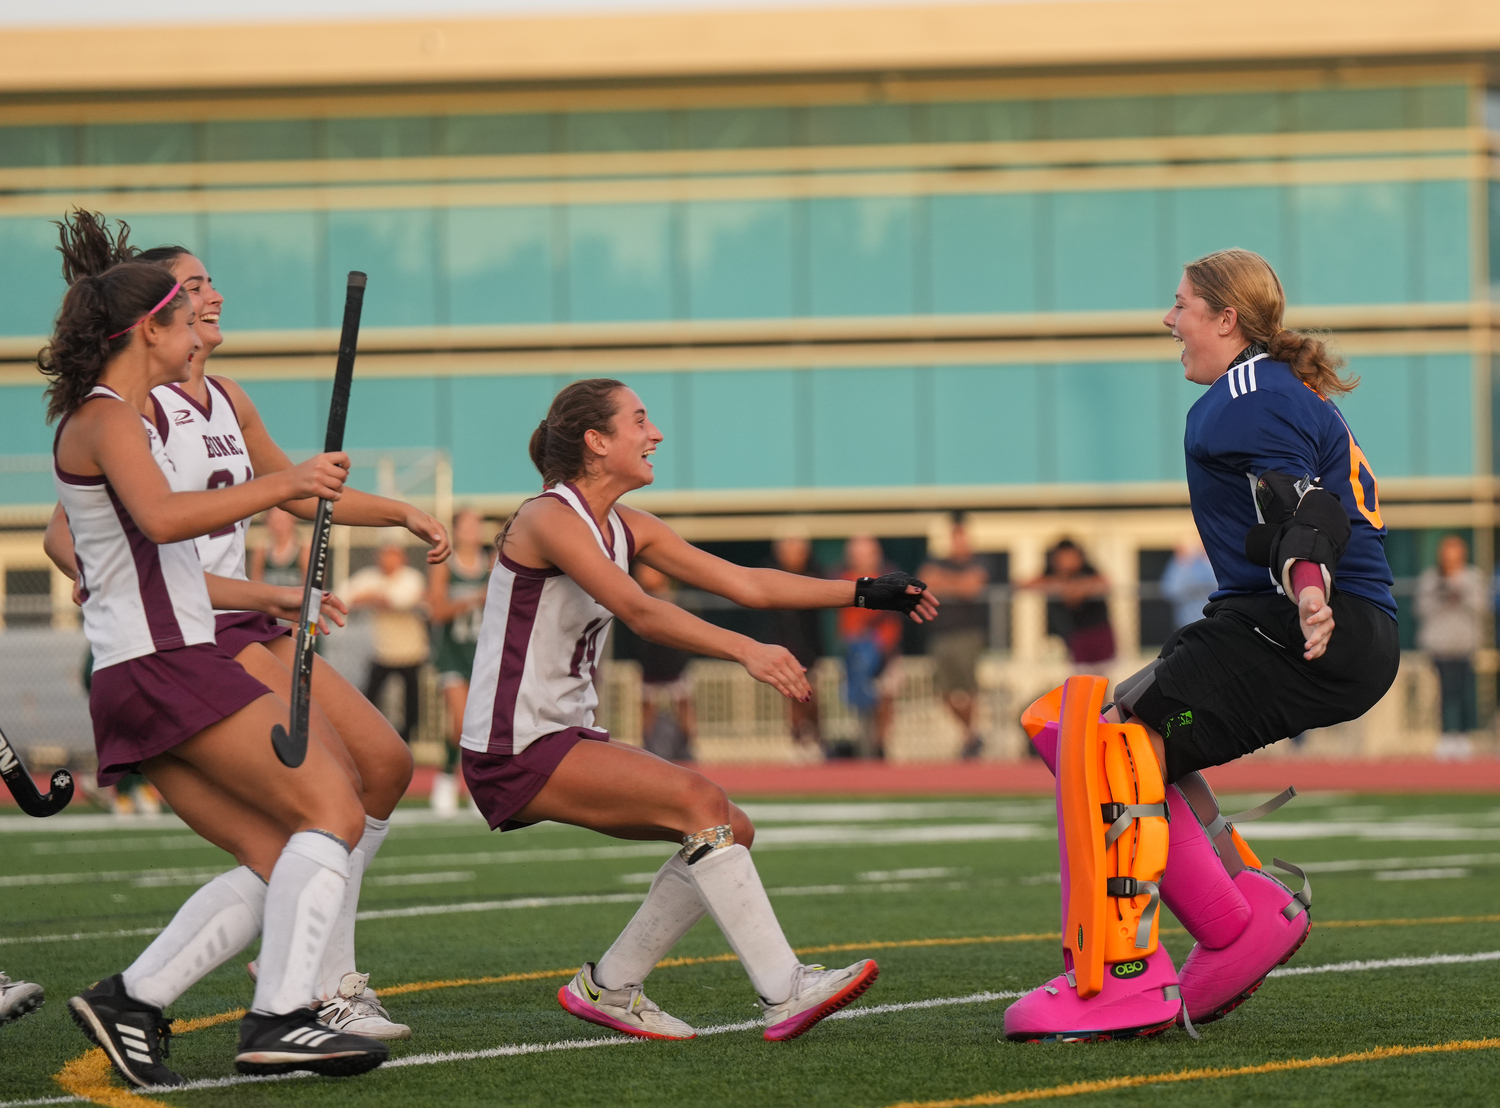 East Hampton's Emma McGrory runs to embrace goalie Caeleigh Schuster after their team's shootout win over Harborfields. RON ESPOSITO